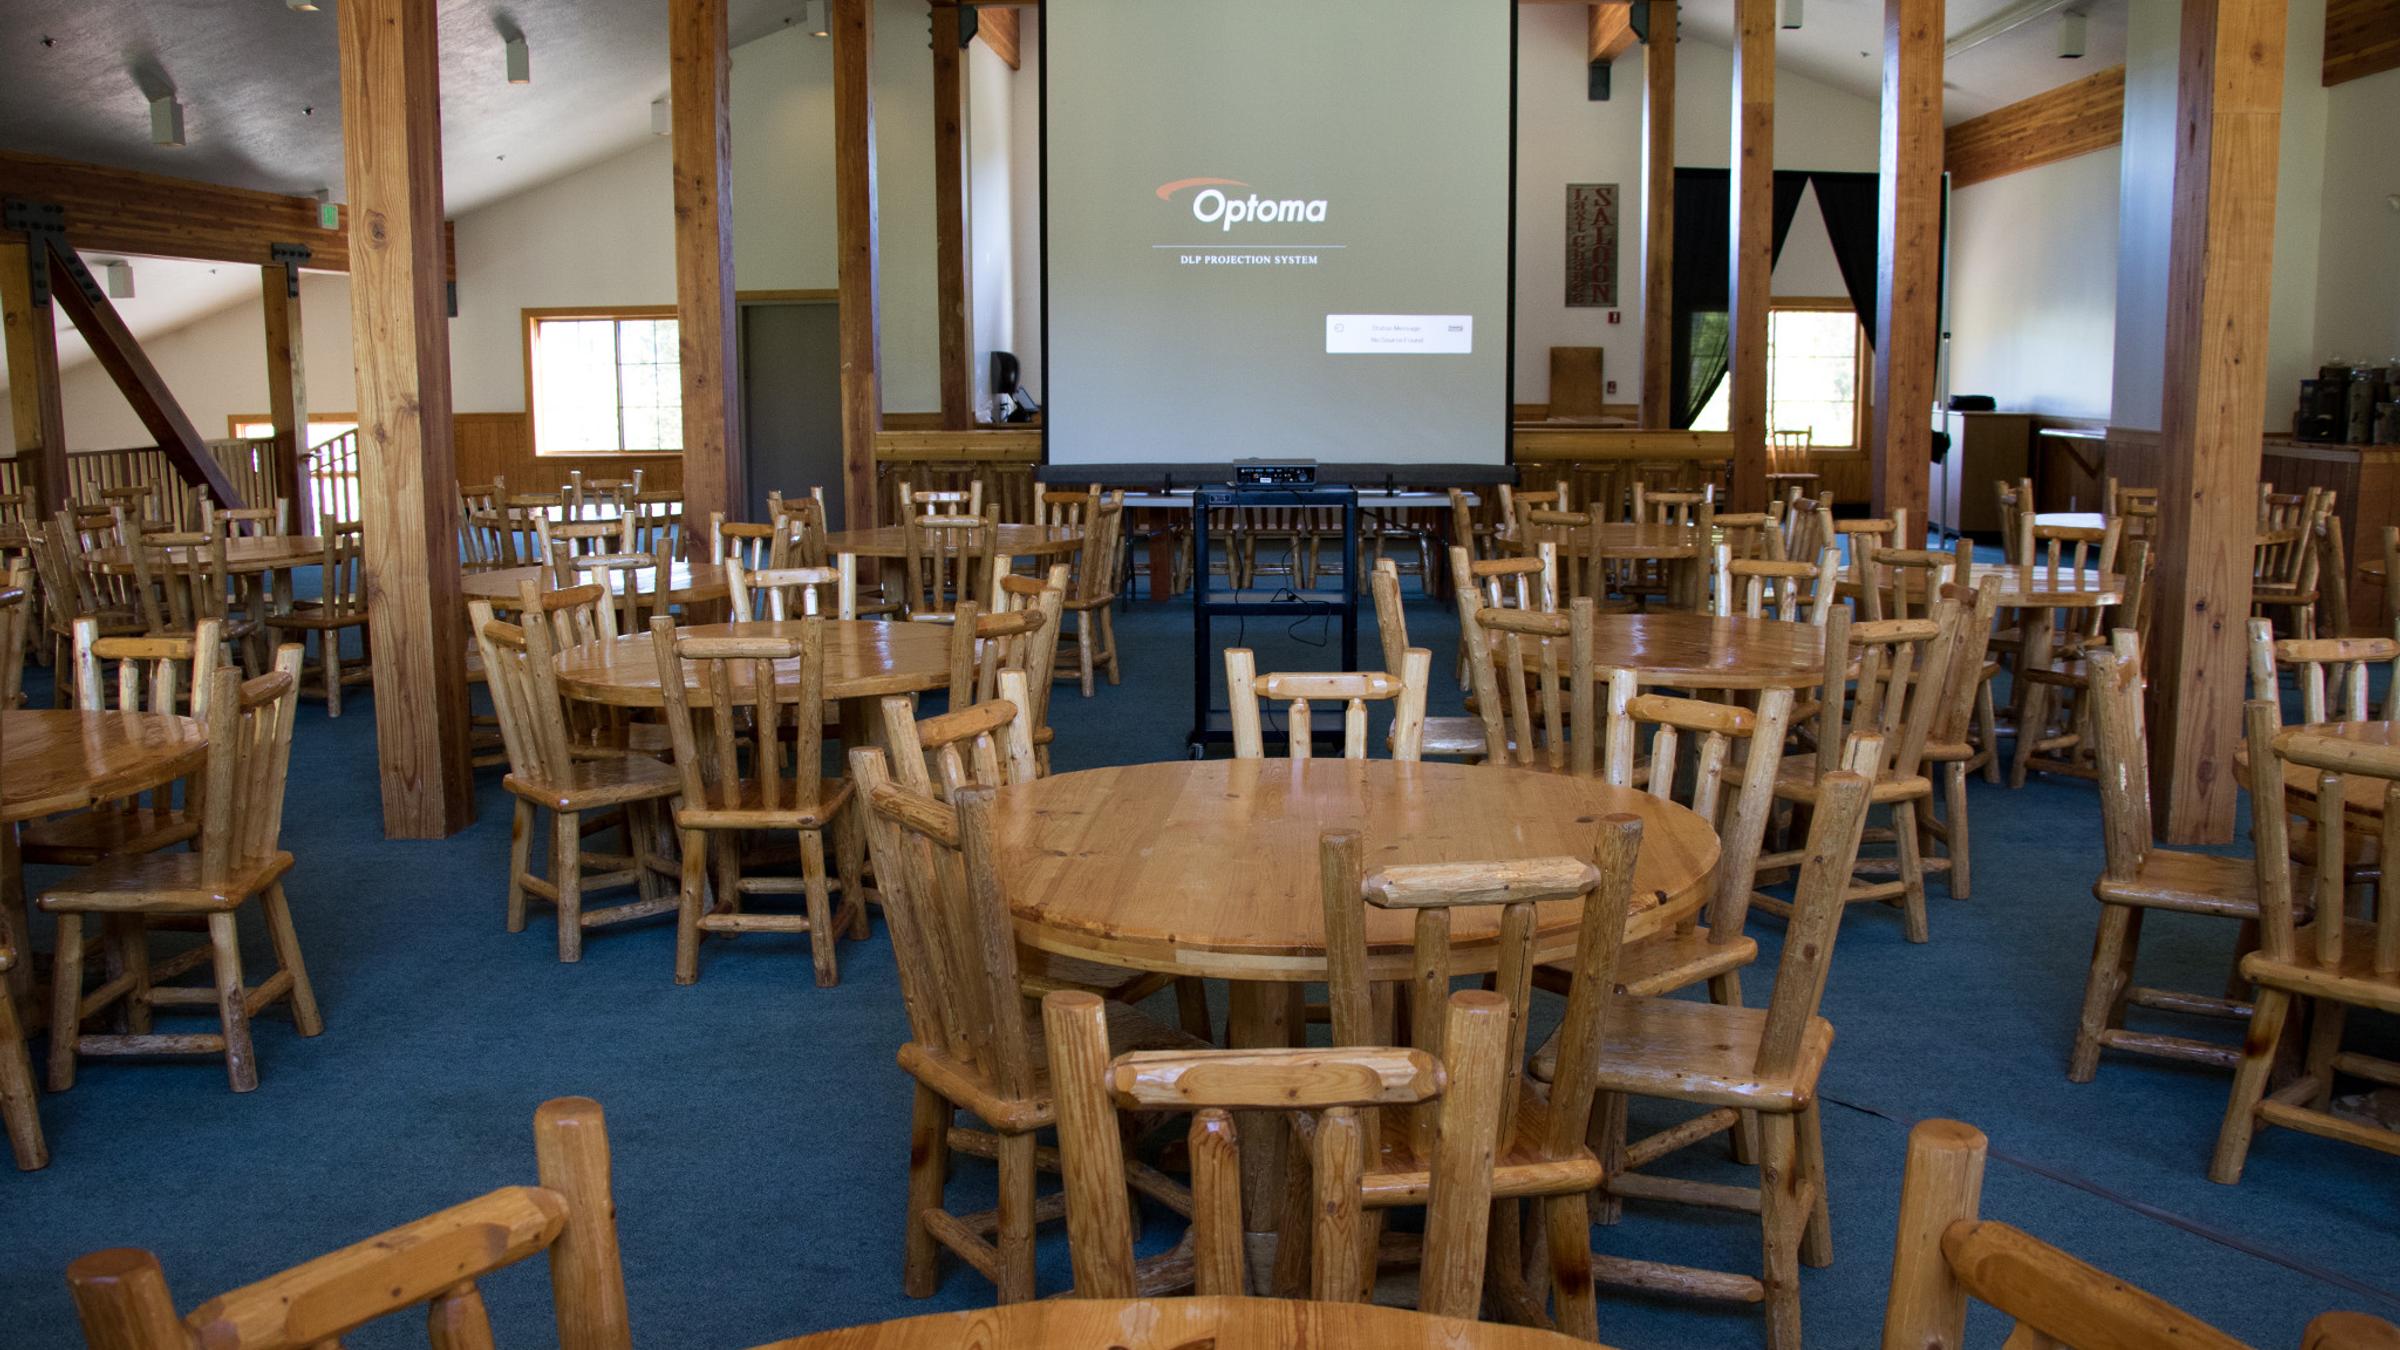 Meeting space in Last Chance Lodge with round wooden tables and chairs setup